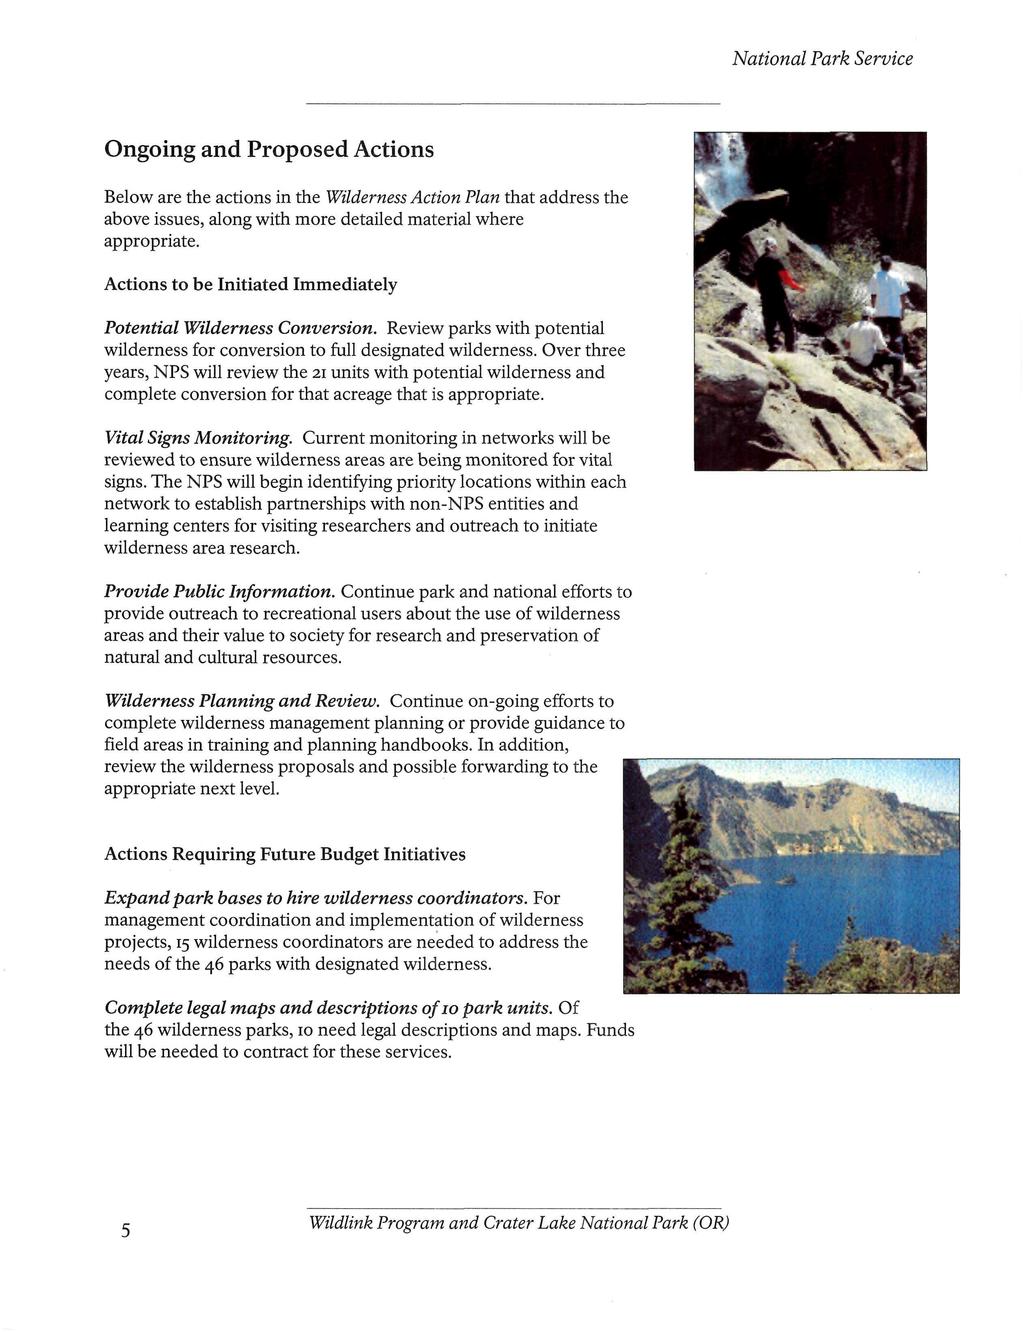 National Park Service Ongoing and Proposed Actions Below are the actions in the Wilderness Action Plan that address the above issues, along with more detailed material where appropriate.